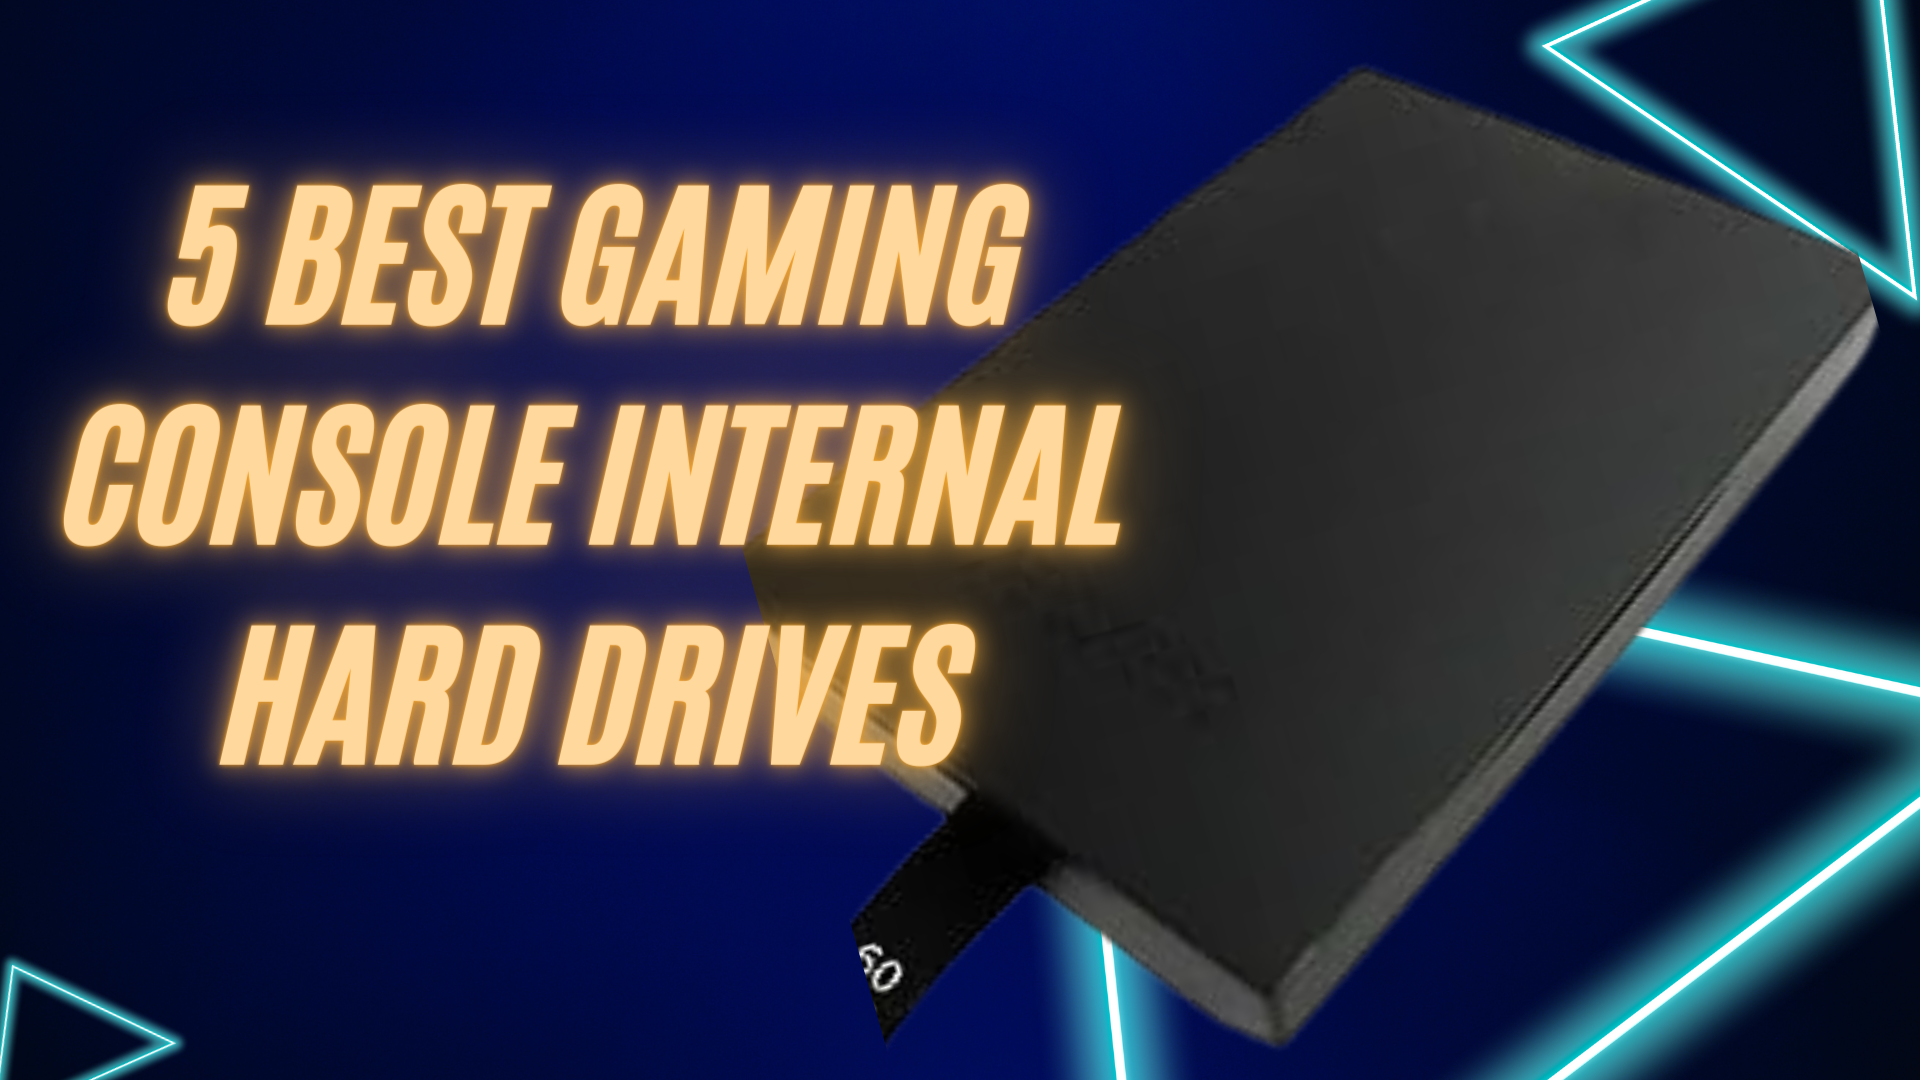 5 Best Gaming Console Internal Hard Drives